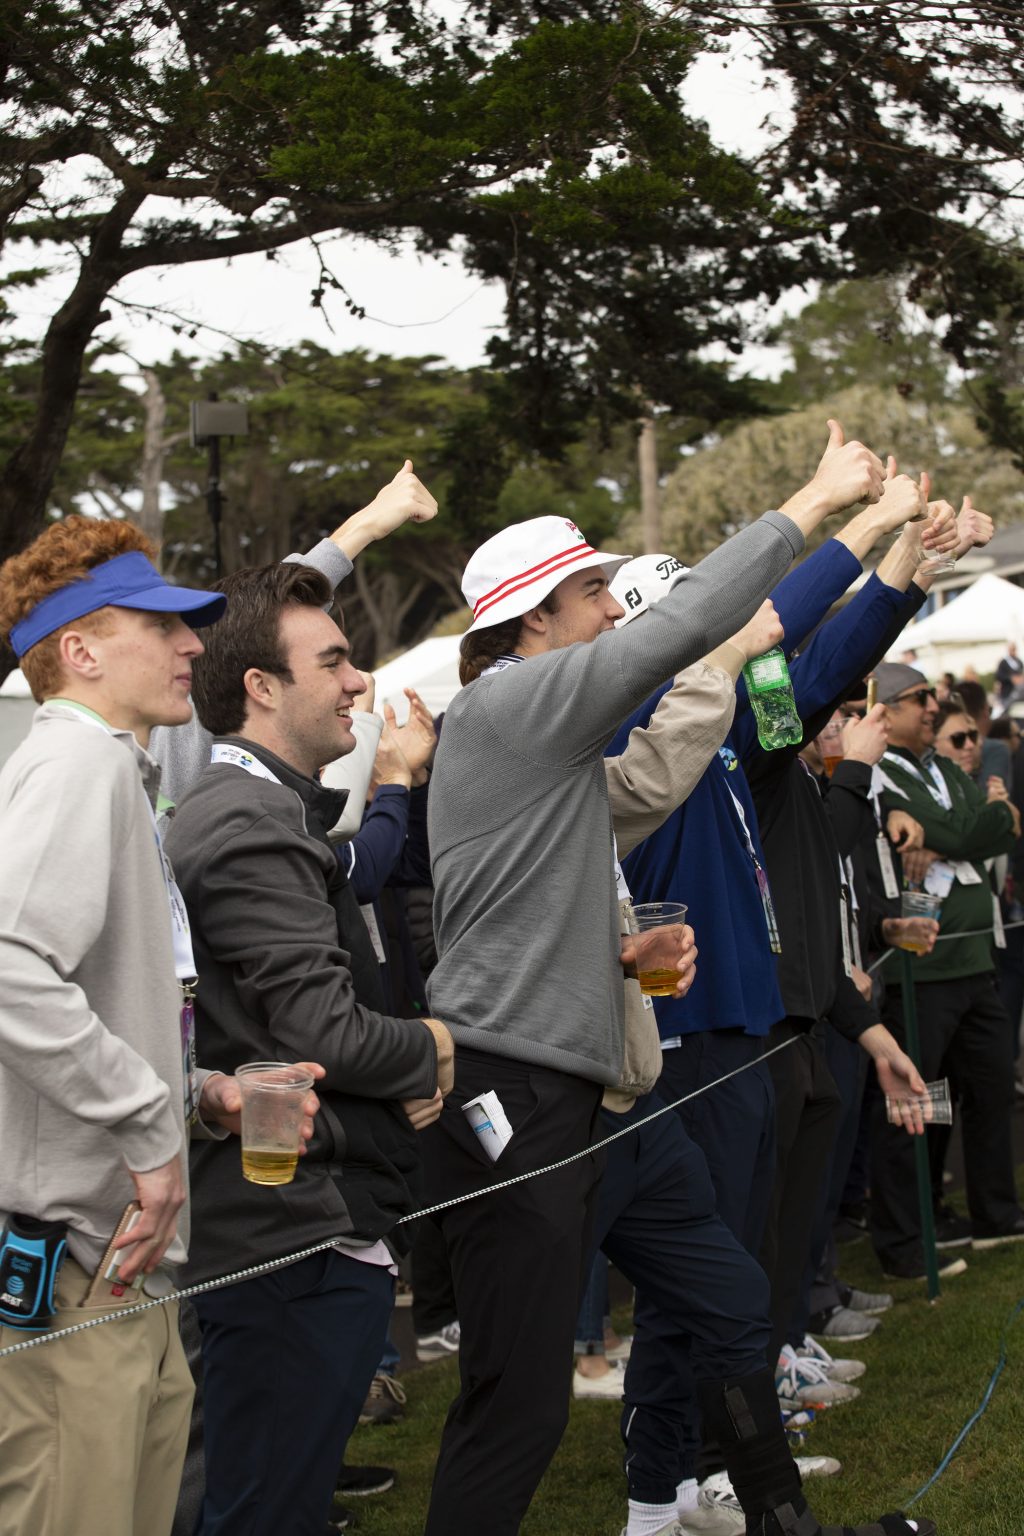 Spectators at the 2020 AT&T Pebble Beach Pro-Am